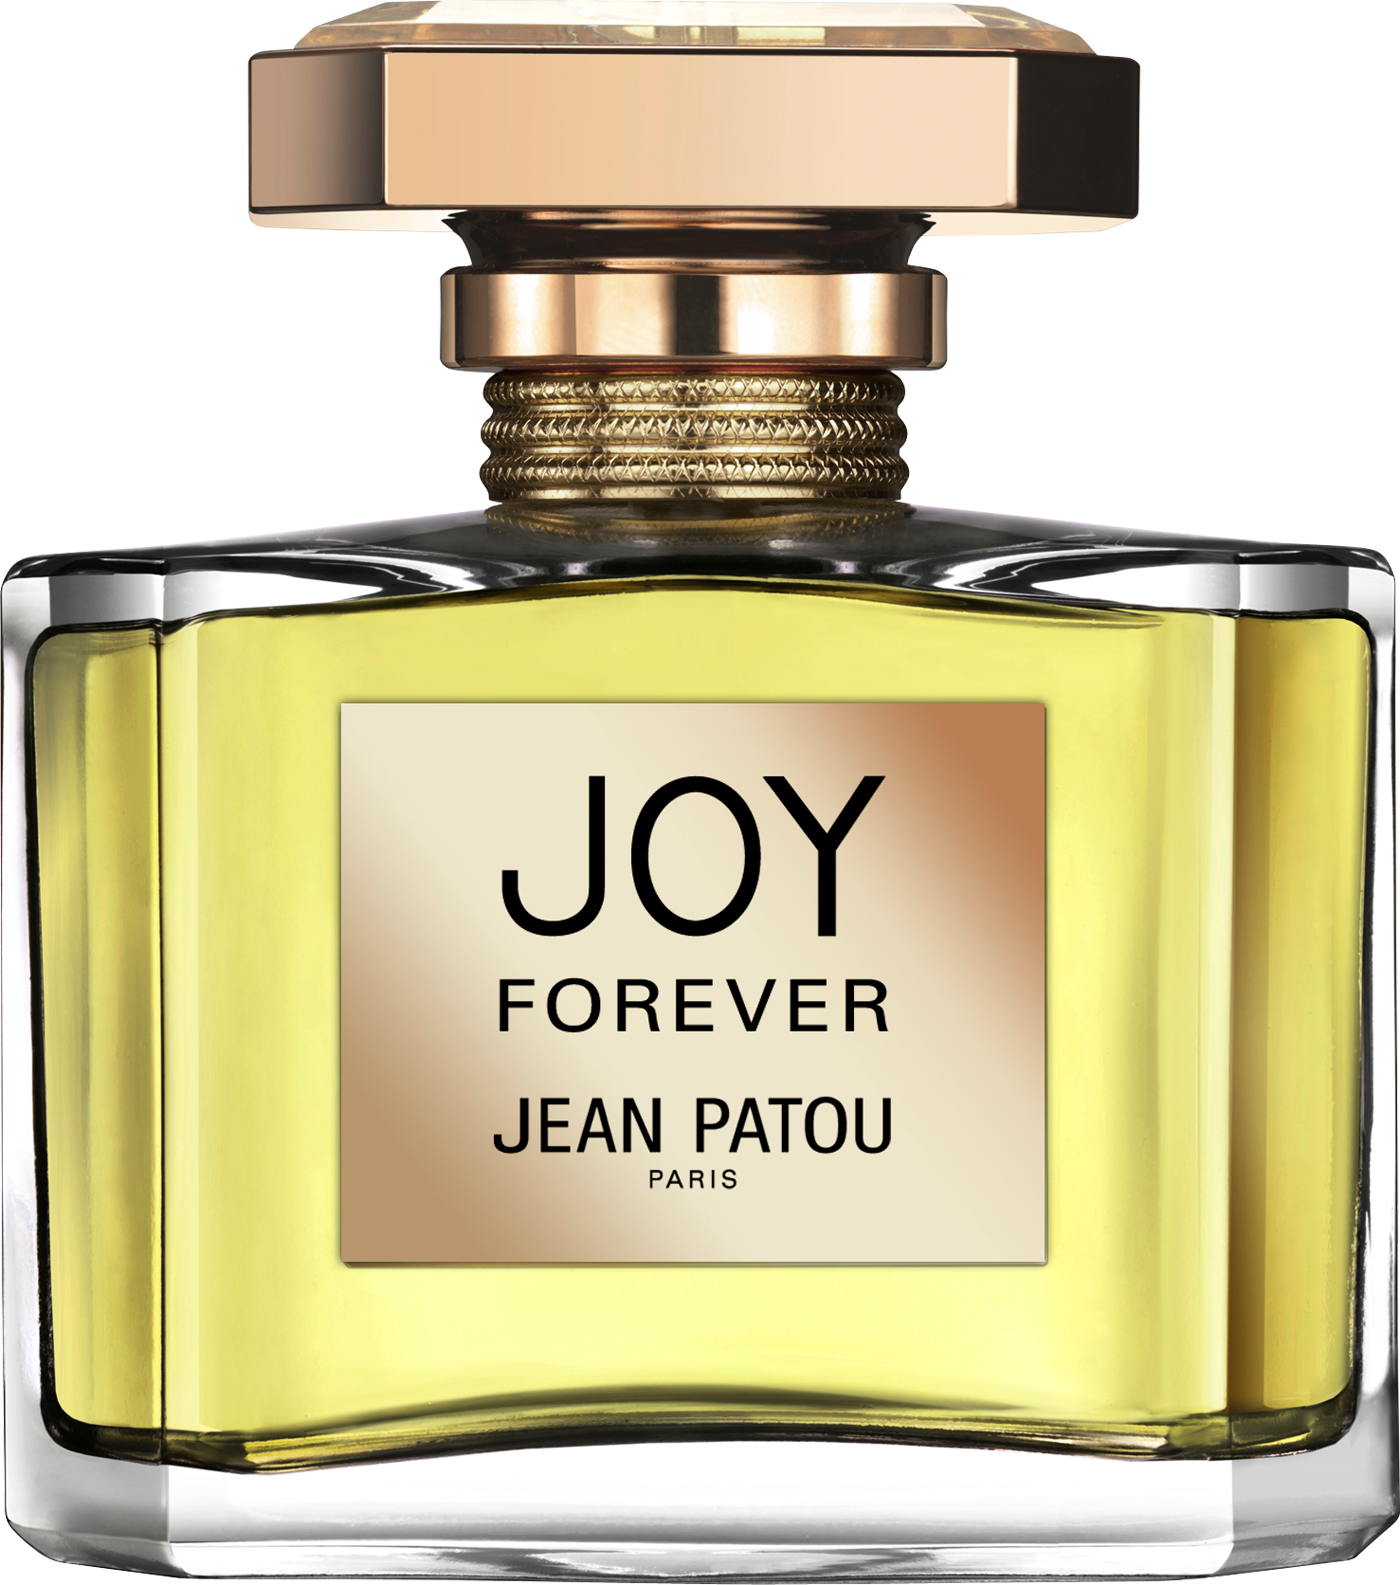 Perfume PNG images free download.